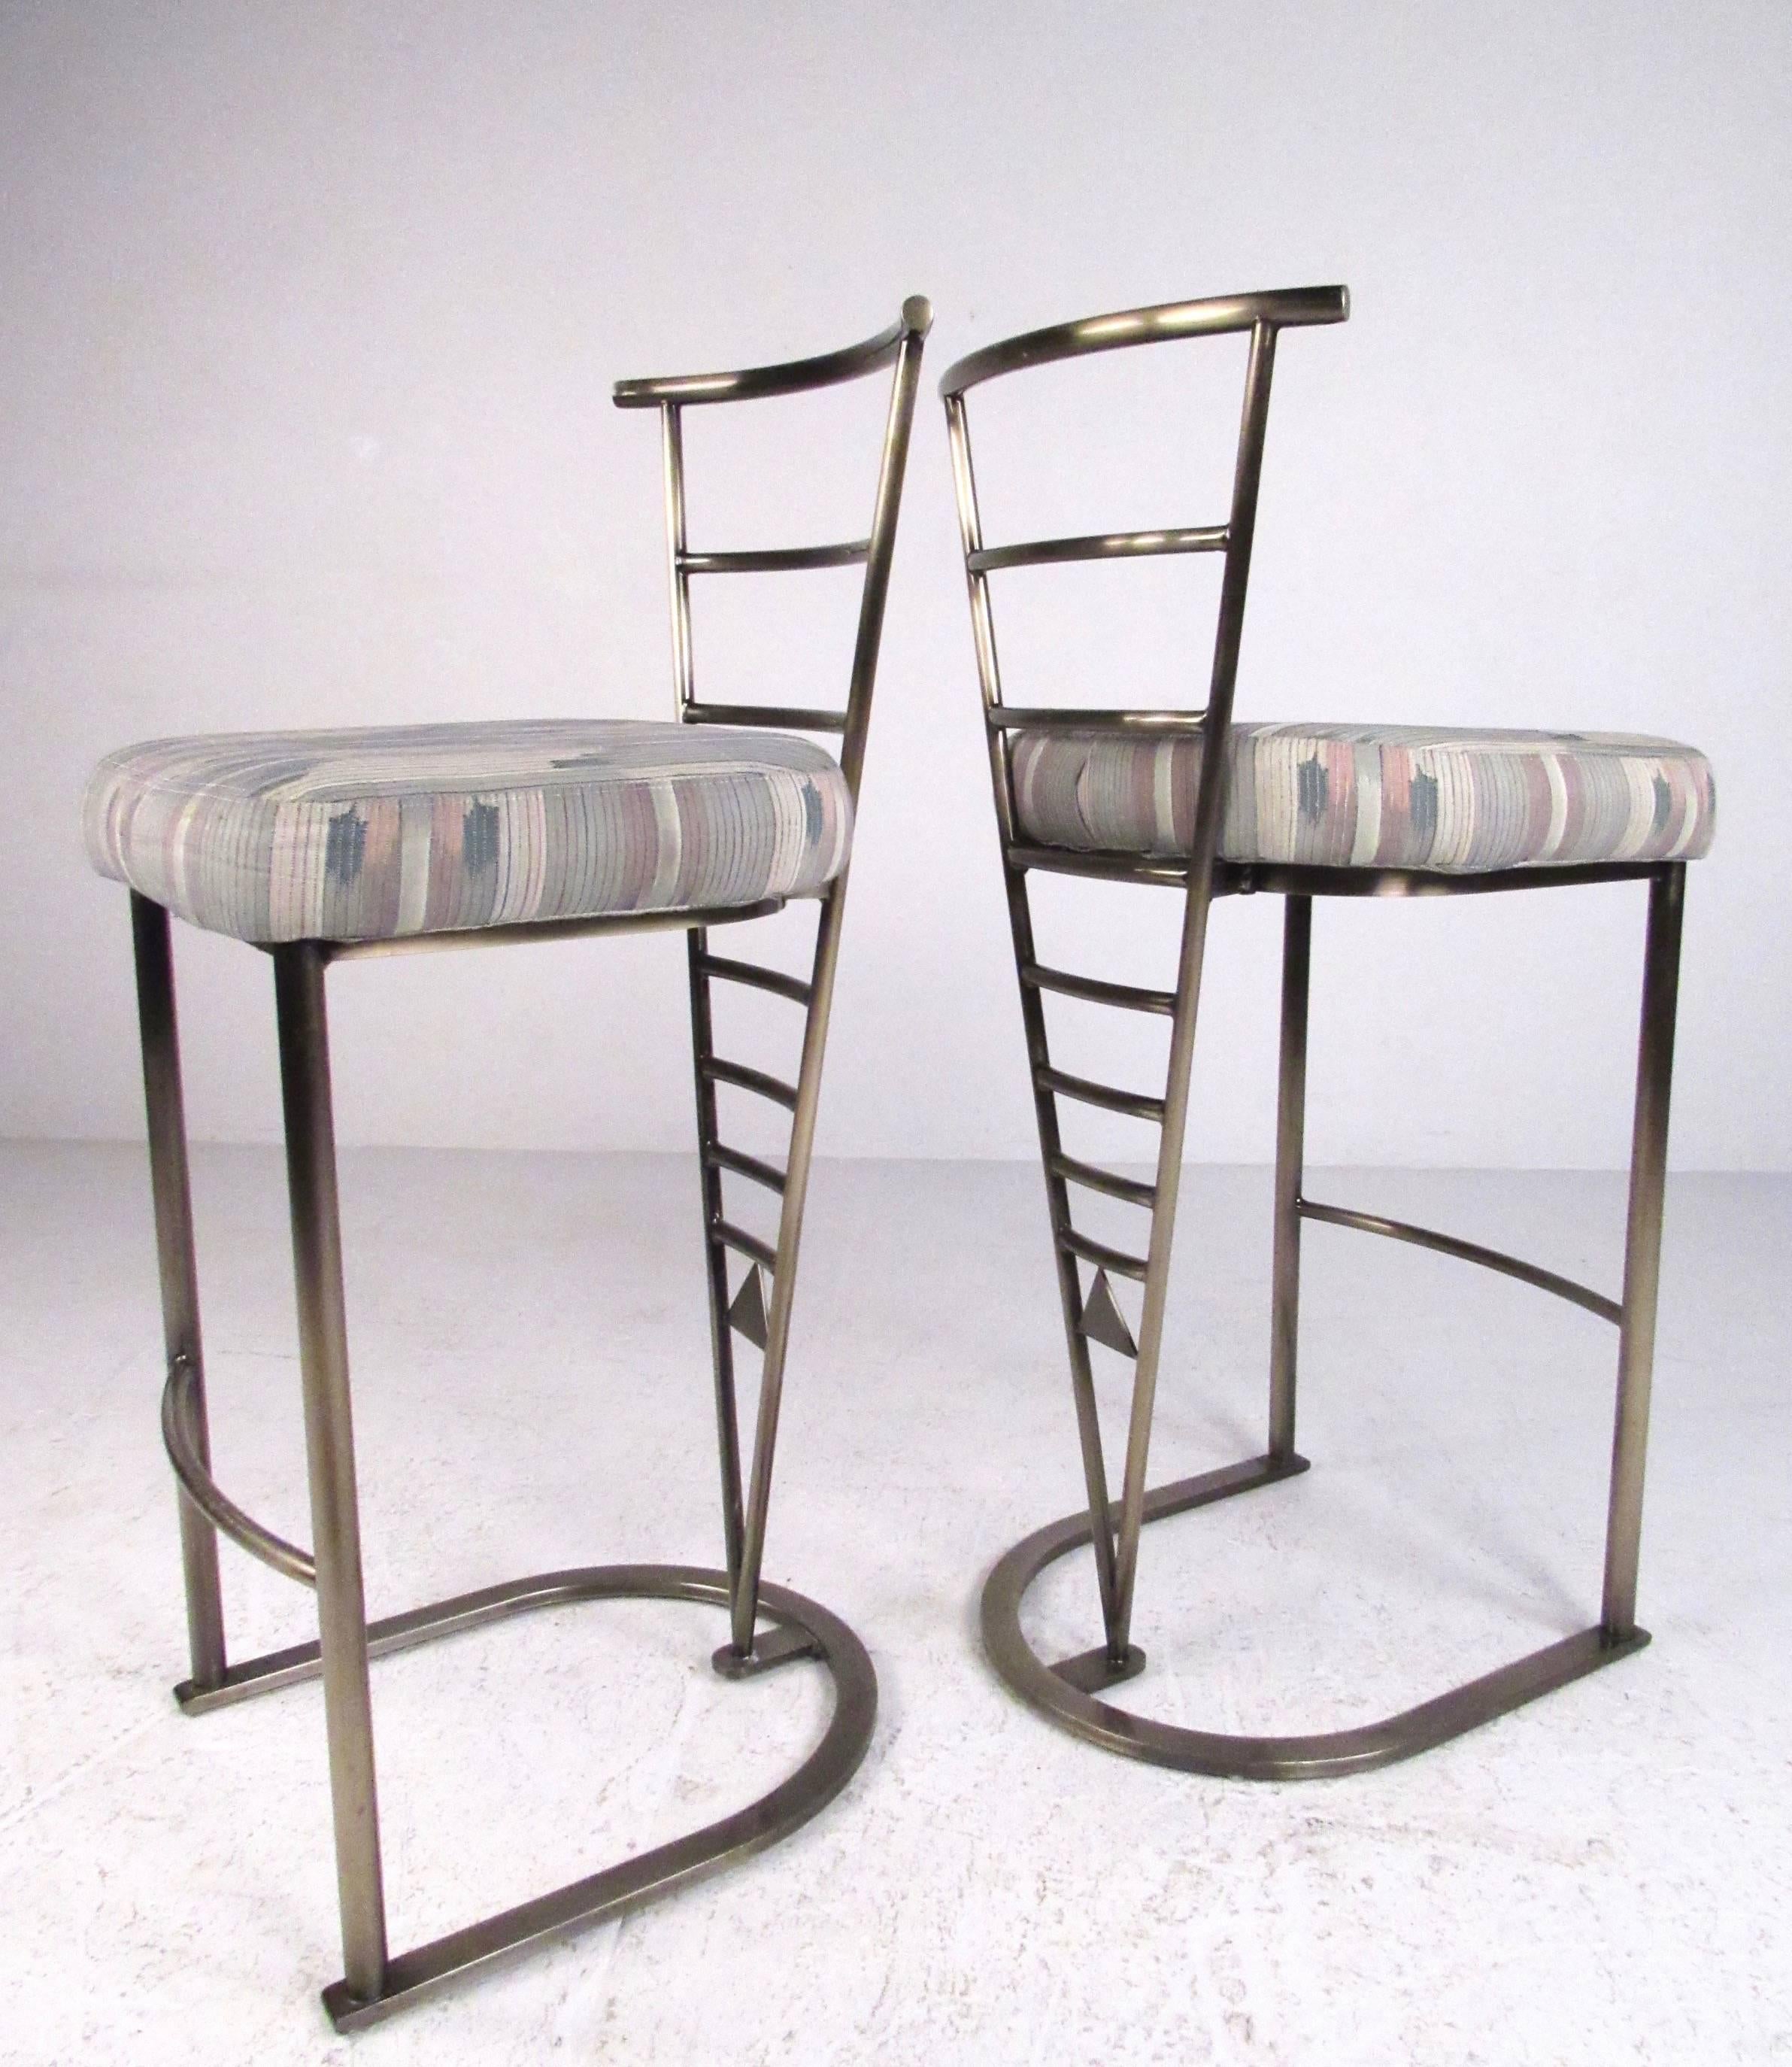 This stylish pair of bar stools by Design Institute of America feature sturdy metal frames with plush upholstered seats. Sculptural design adds modern flare to any bar setting, please confirm item location (NY or NJ).